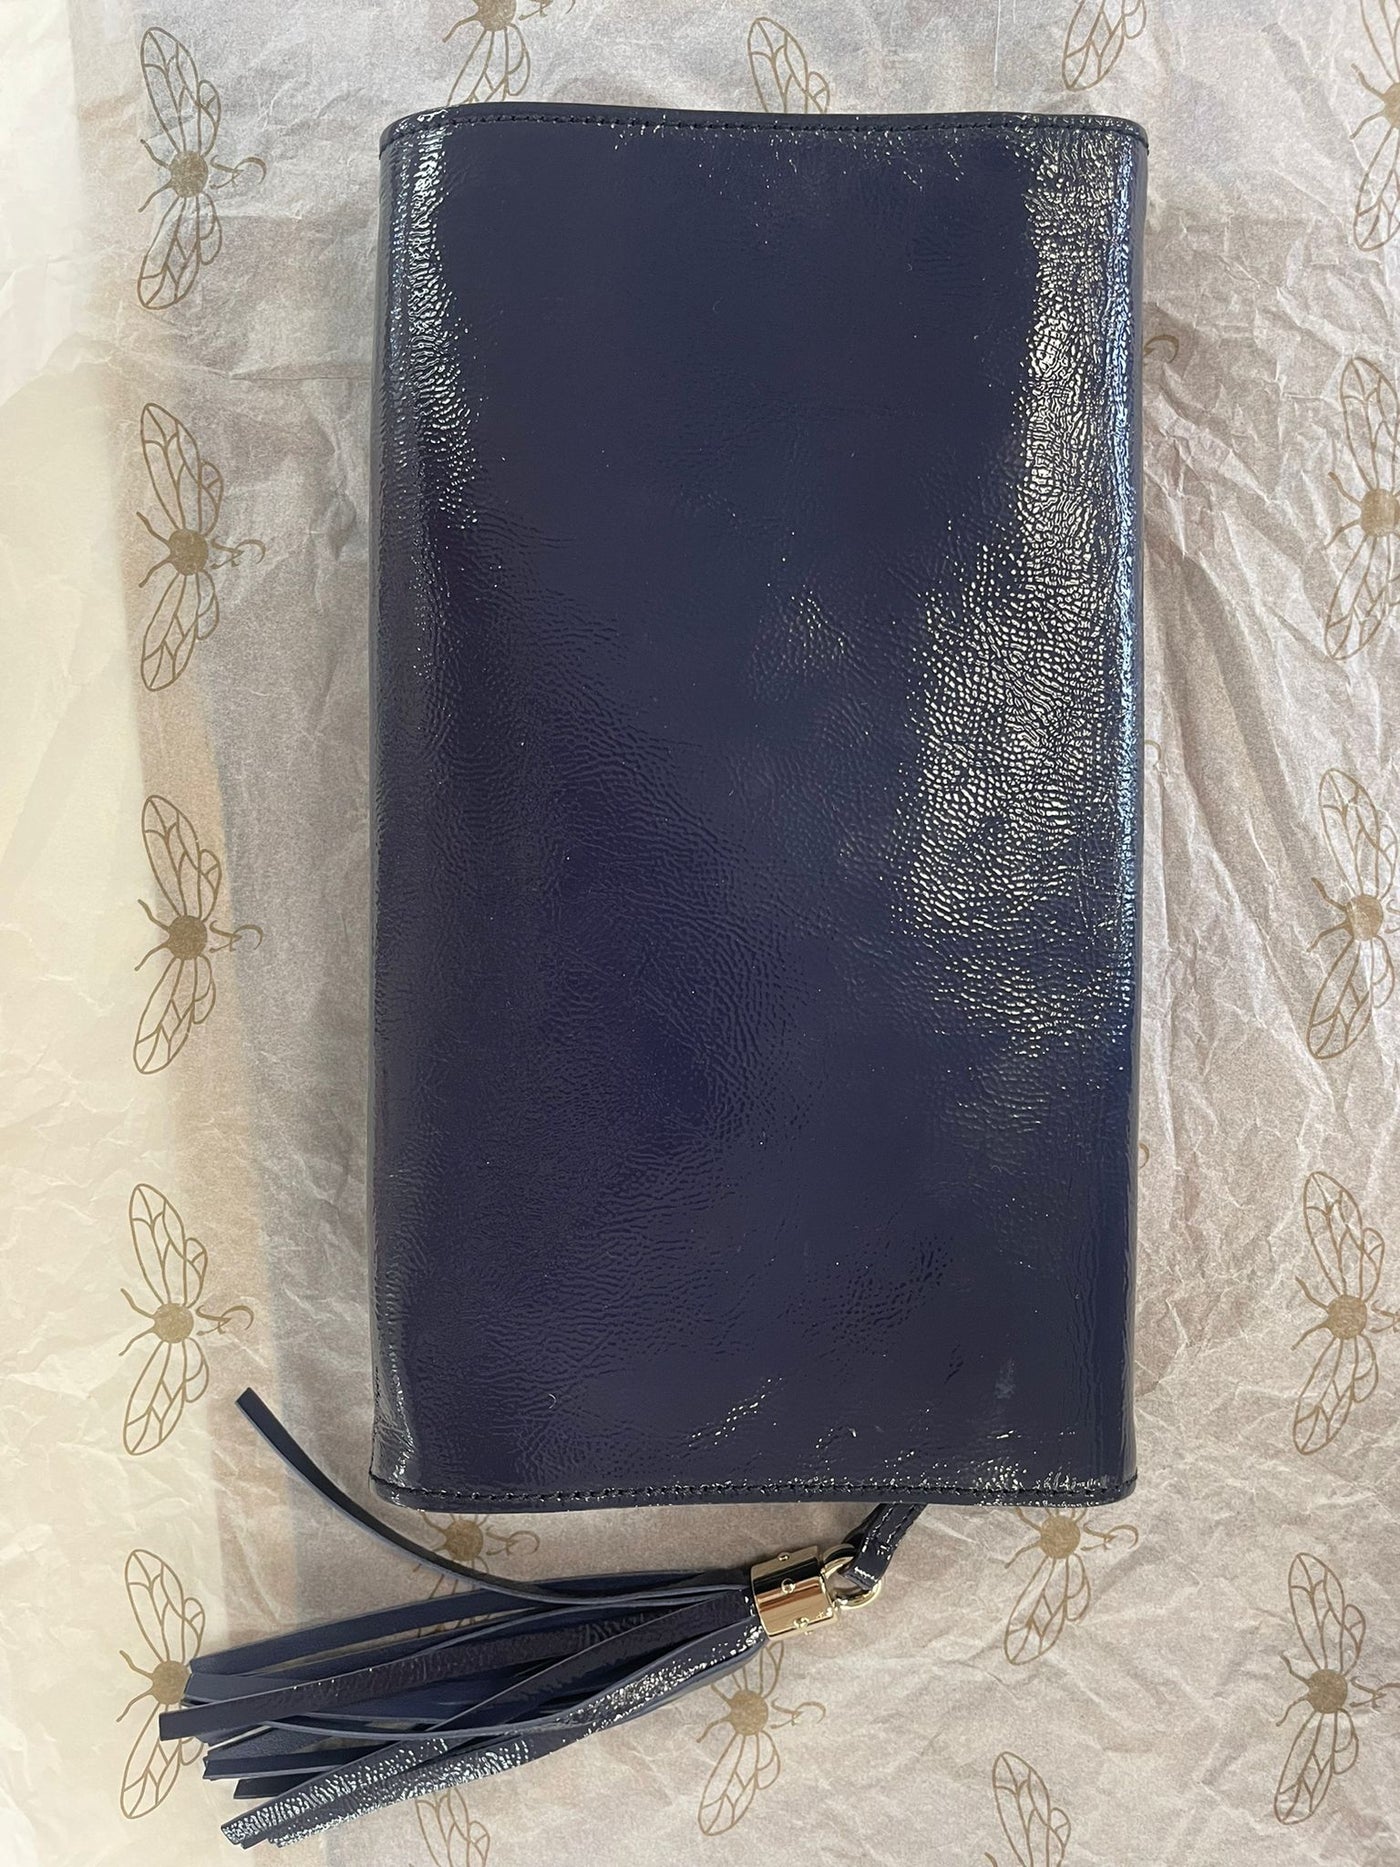 Gucci Navy blue patent leather soho clutch